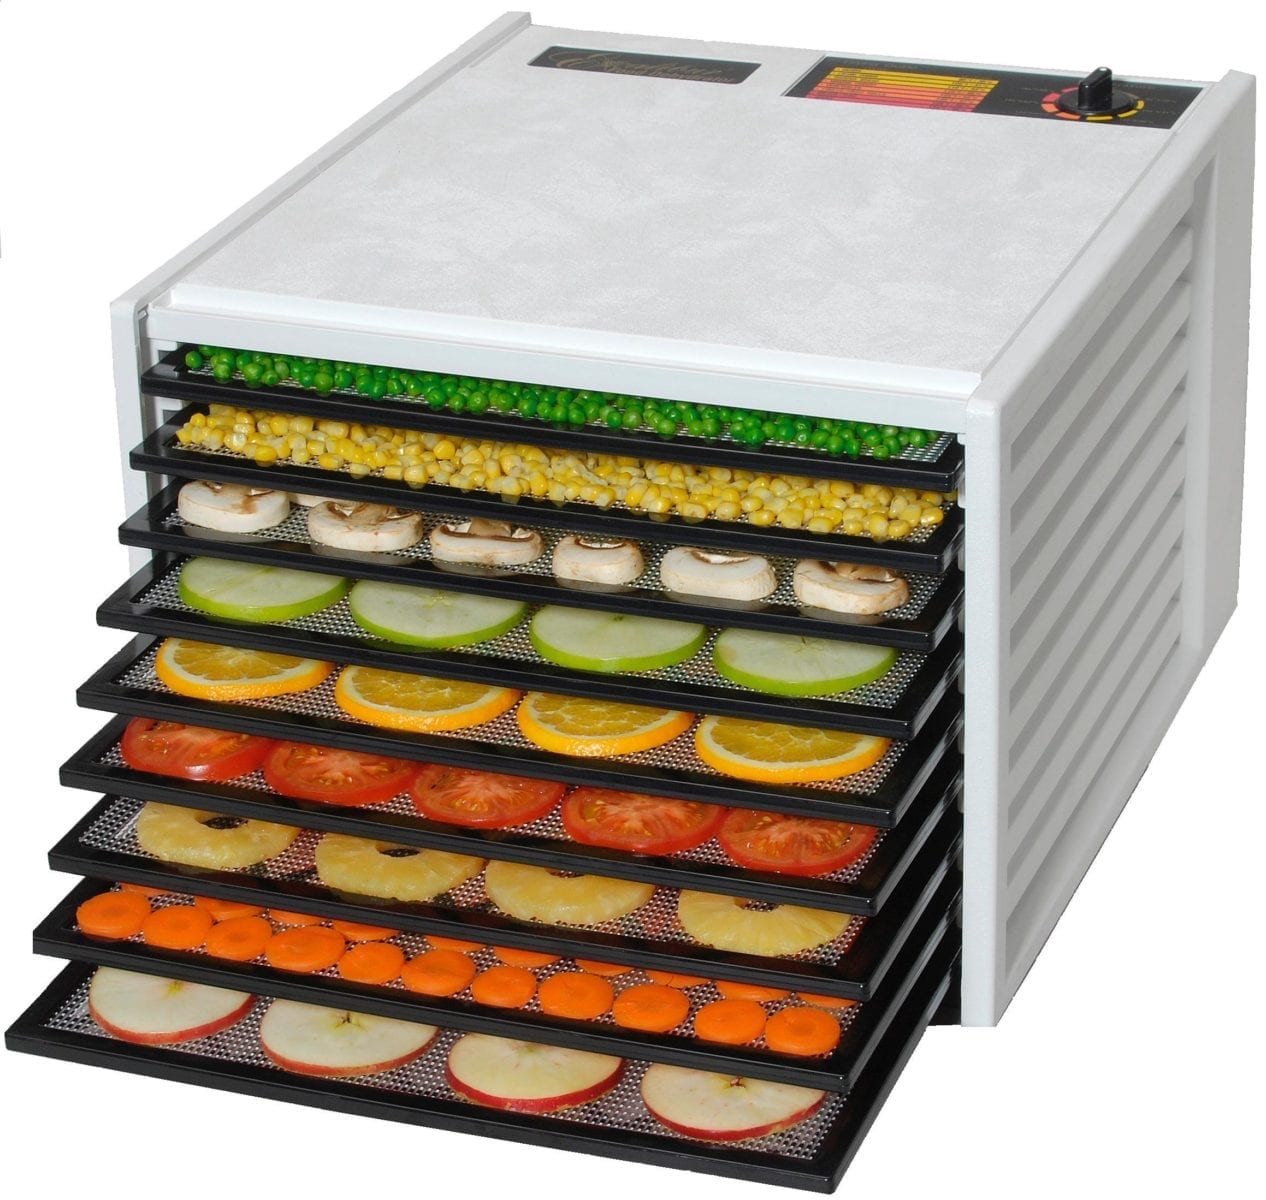 The dehydrator for yogis